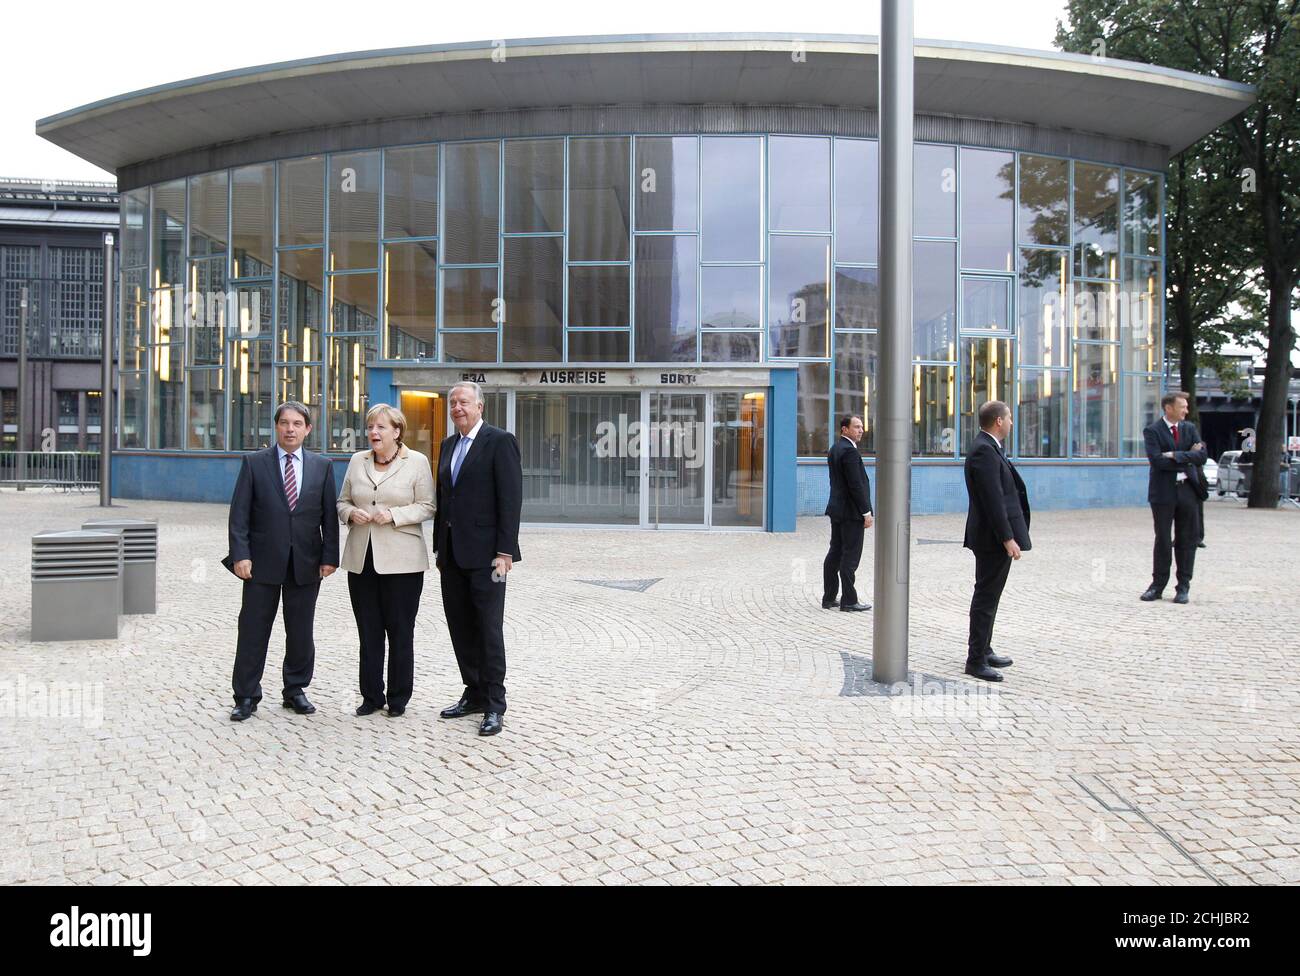 German Chancellor Angela Merkel (2nd L), Culture State Minister Bernd Neumann (3rd L) and the director of the House of the History of Germany foundation, Hans Walter Huetter (L), pose outside the former Traenenpalast (Palace of Tears) East German border crossing station during the opening of the 'Grenzerfahrung' (Border experiences) exhibition in Berlin, September 14, 2011.  The building at Berlin's Friedrichstrasse station earned its colloquial name among Berliners because of the many tearful scenes that took place outside its doors during the years of Germany's division.   REUTERS/Thomas Pet Stock Photo